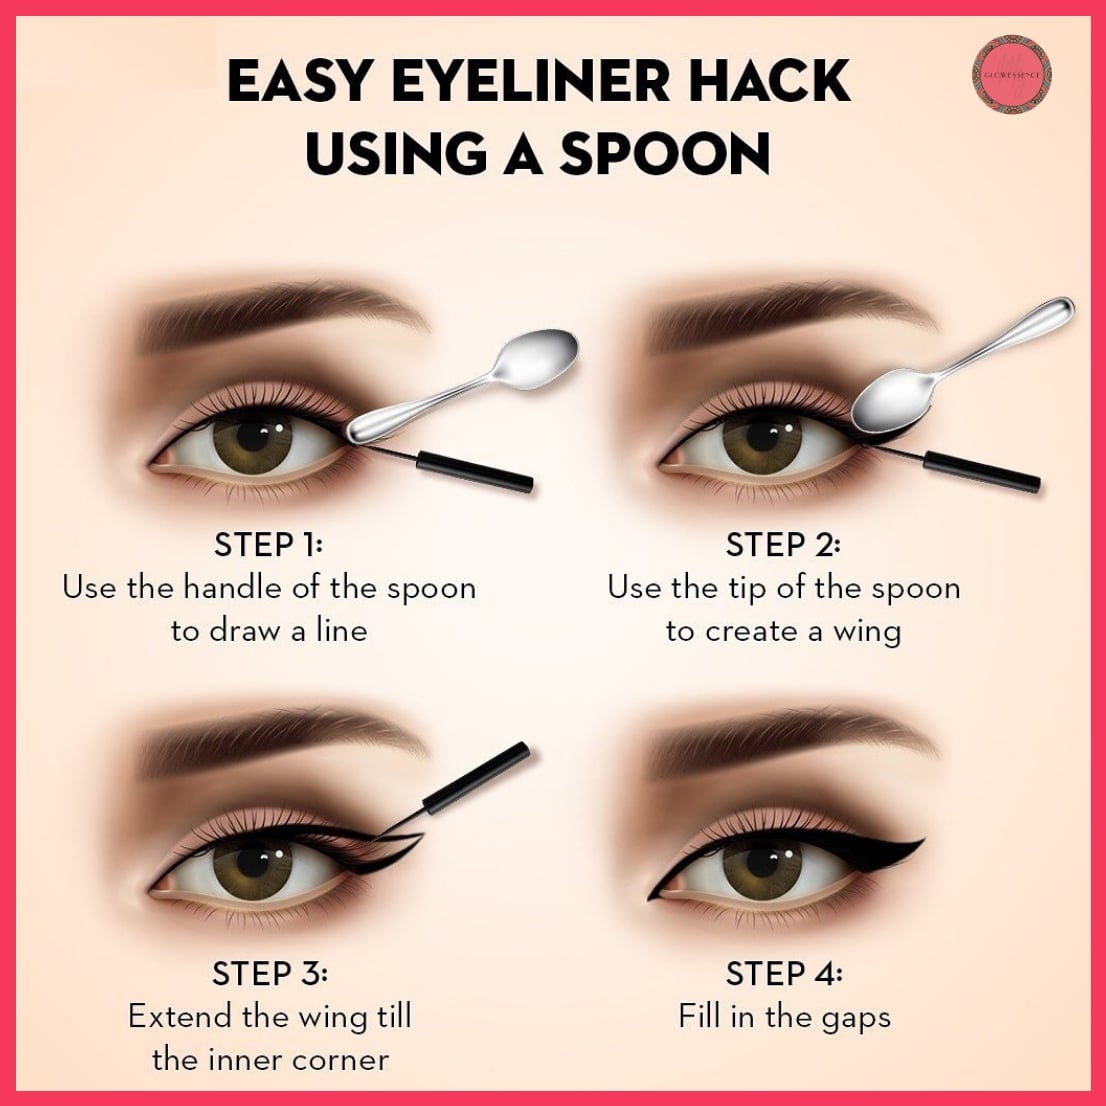 Want to get the perfect winged eye liner? Try this hack!
 
Follow us on @myglowessence to get best idea on Skin Care, LUXURY cosmetics and WOMEN lifestyle products. 

#skincare #skincareroutine #skincaretips#skincareproducts #facecareroutine #facecare #blemishes  #myglowessence